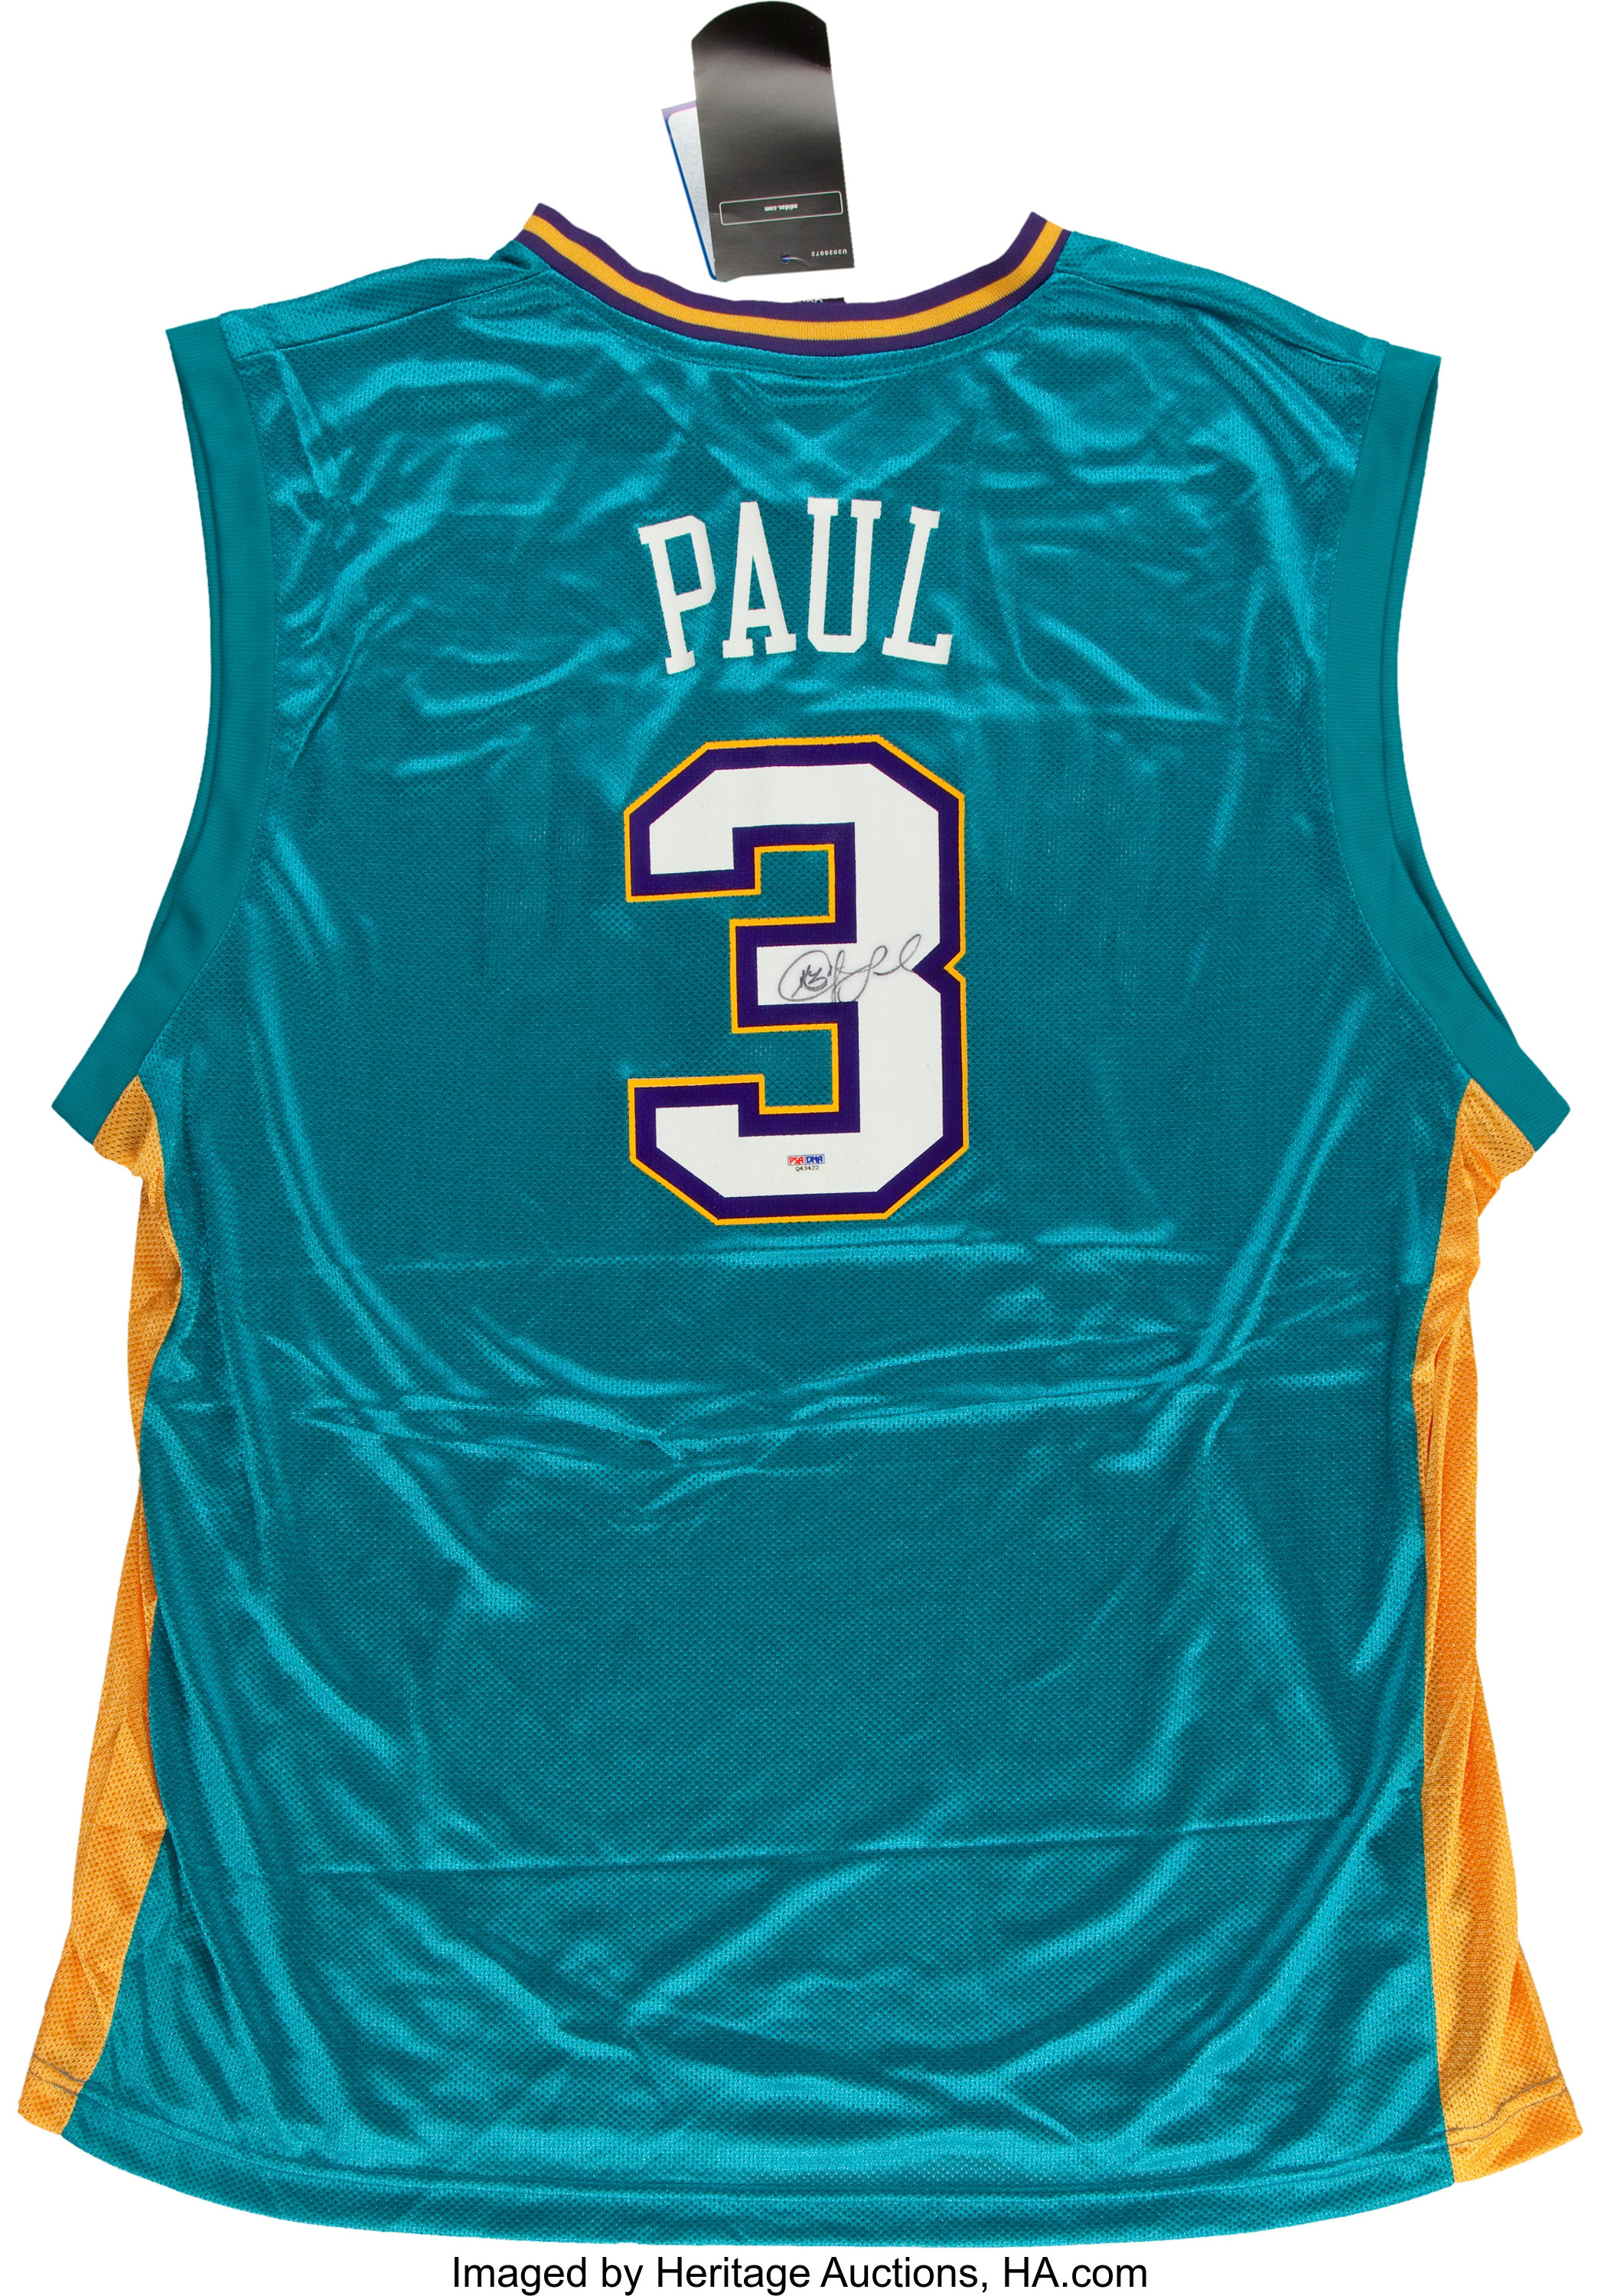 2008-09 Chris Paul Game-Worn Jersey Signed New Orleans Hornets - COA JSA &  100% Authentic Team